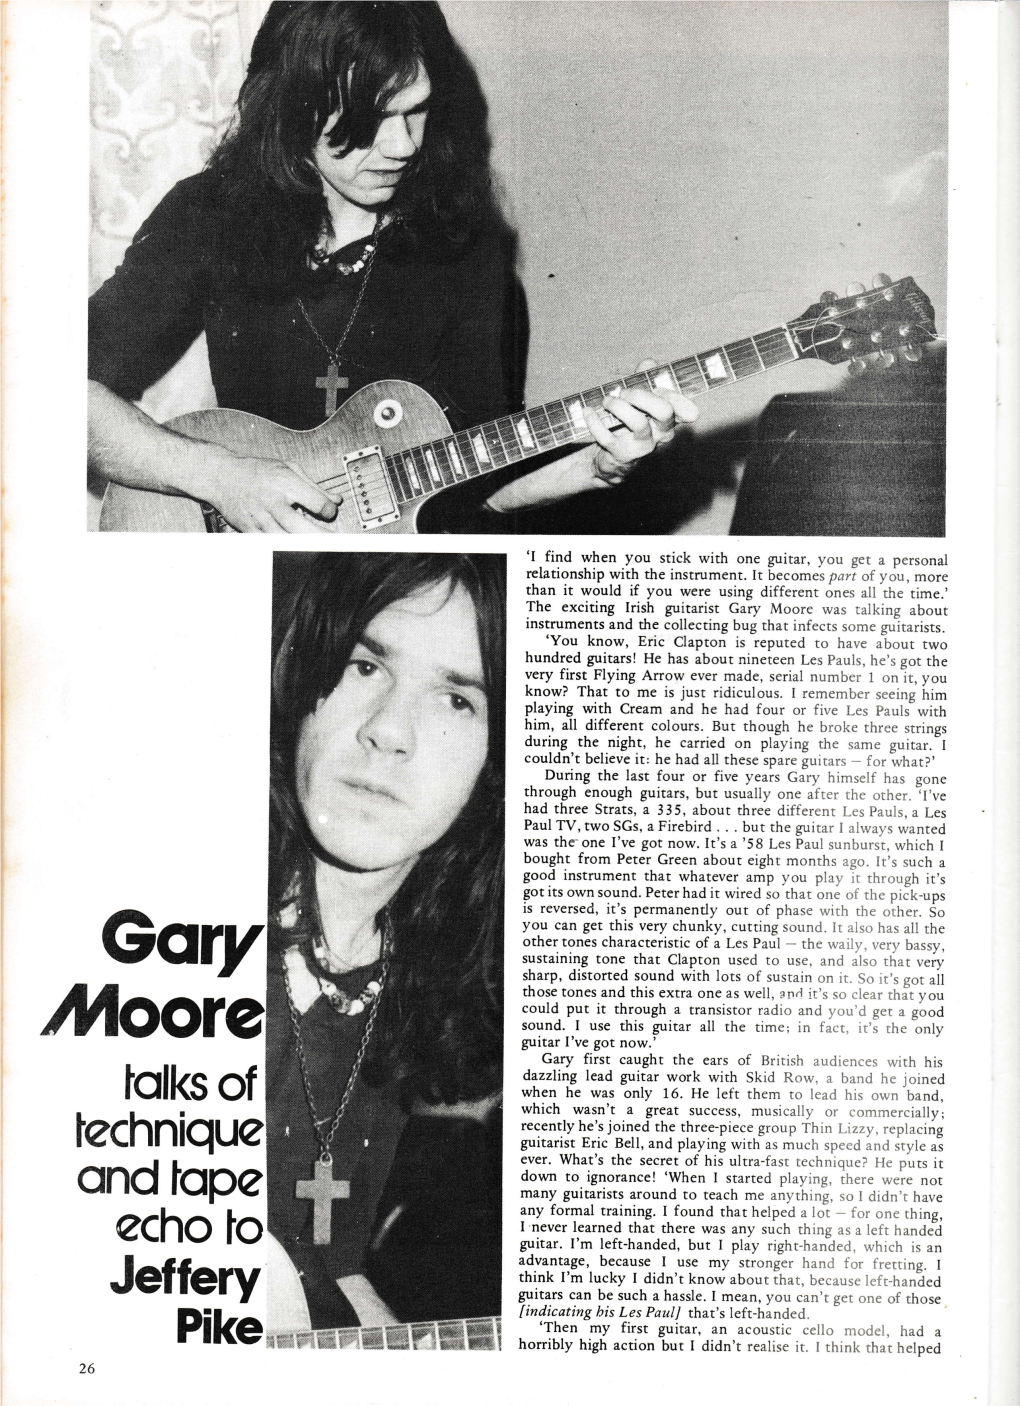 Gary Moore Interview